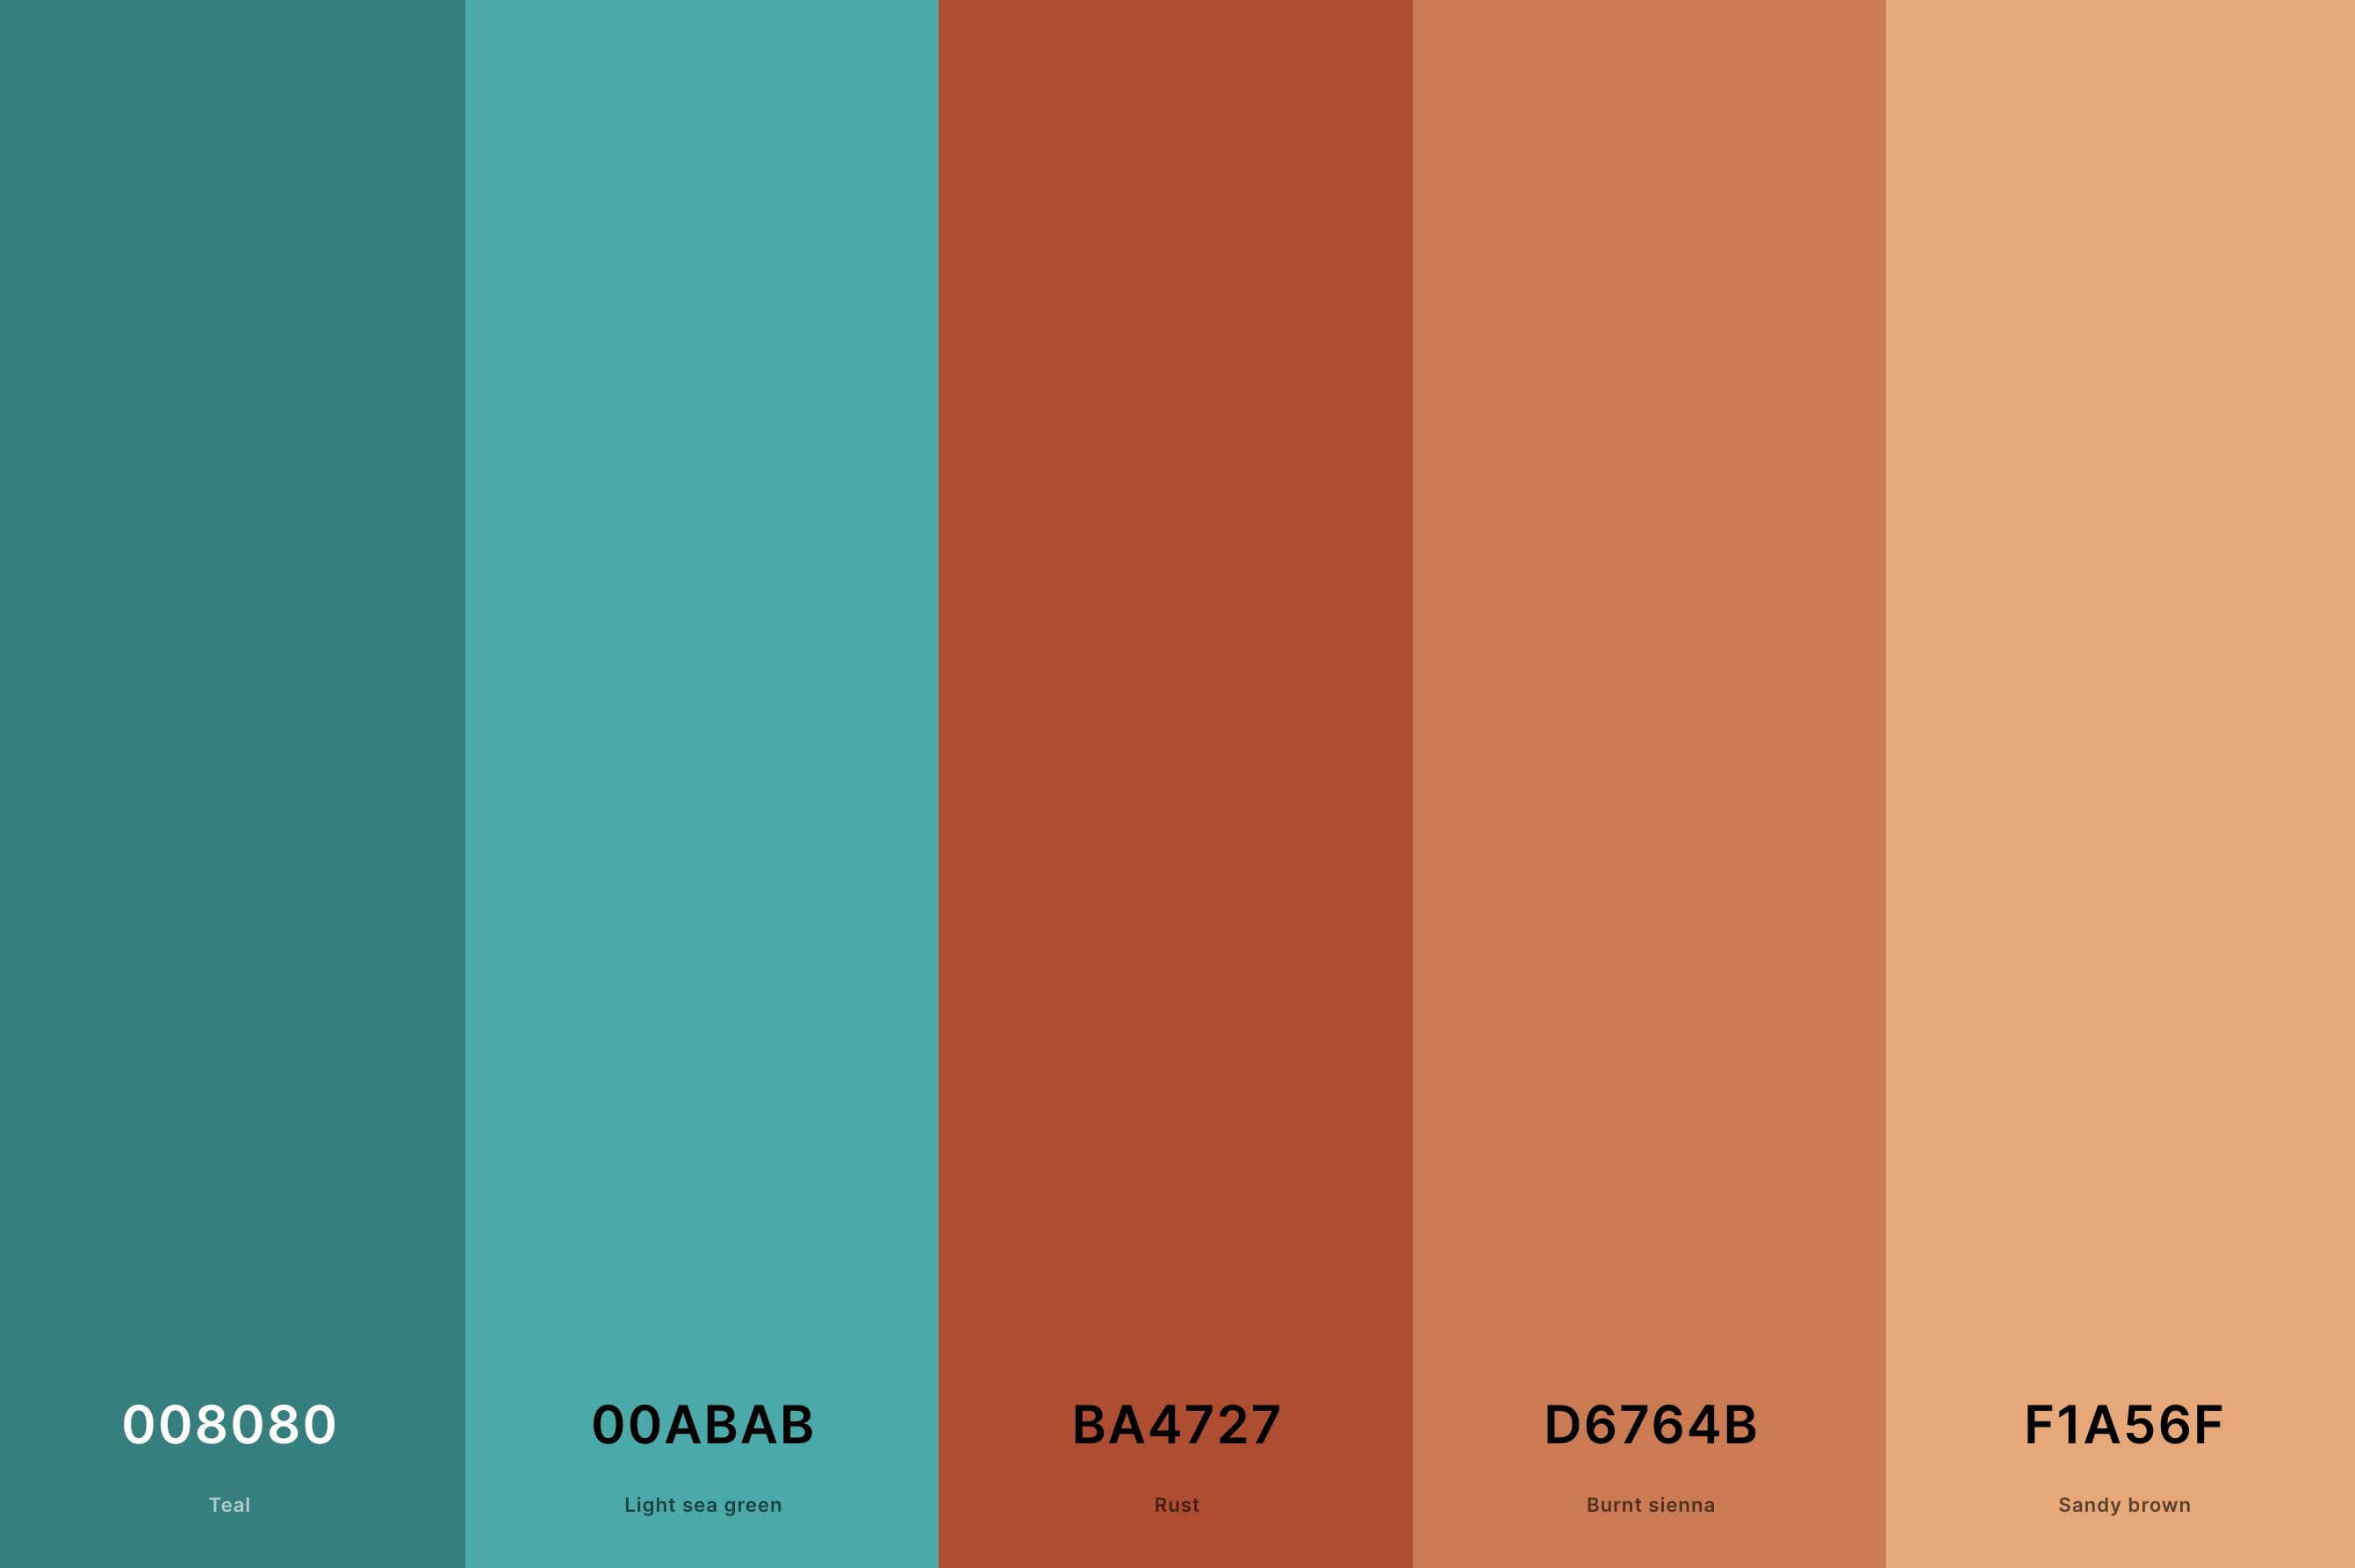 1. Teal And Terracotta Color Palette Color Palette with Teal (Hex #008080) + Light Sea Green (Hex #00ABAB) + Rust (Hex #BA4727) + Burnt Sienna (Hex #D6764B) + Sandy Brown (Hex #F1A56F) Color Palette with Hex Codes